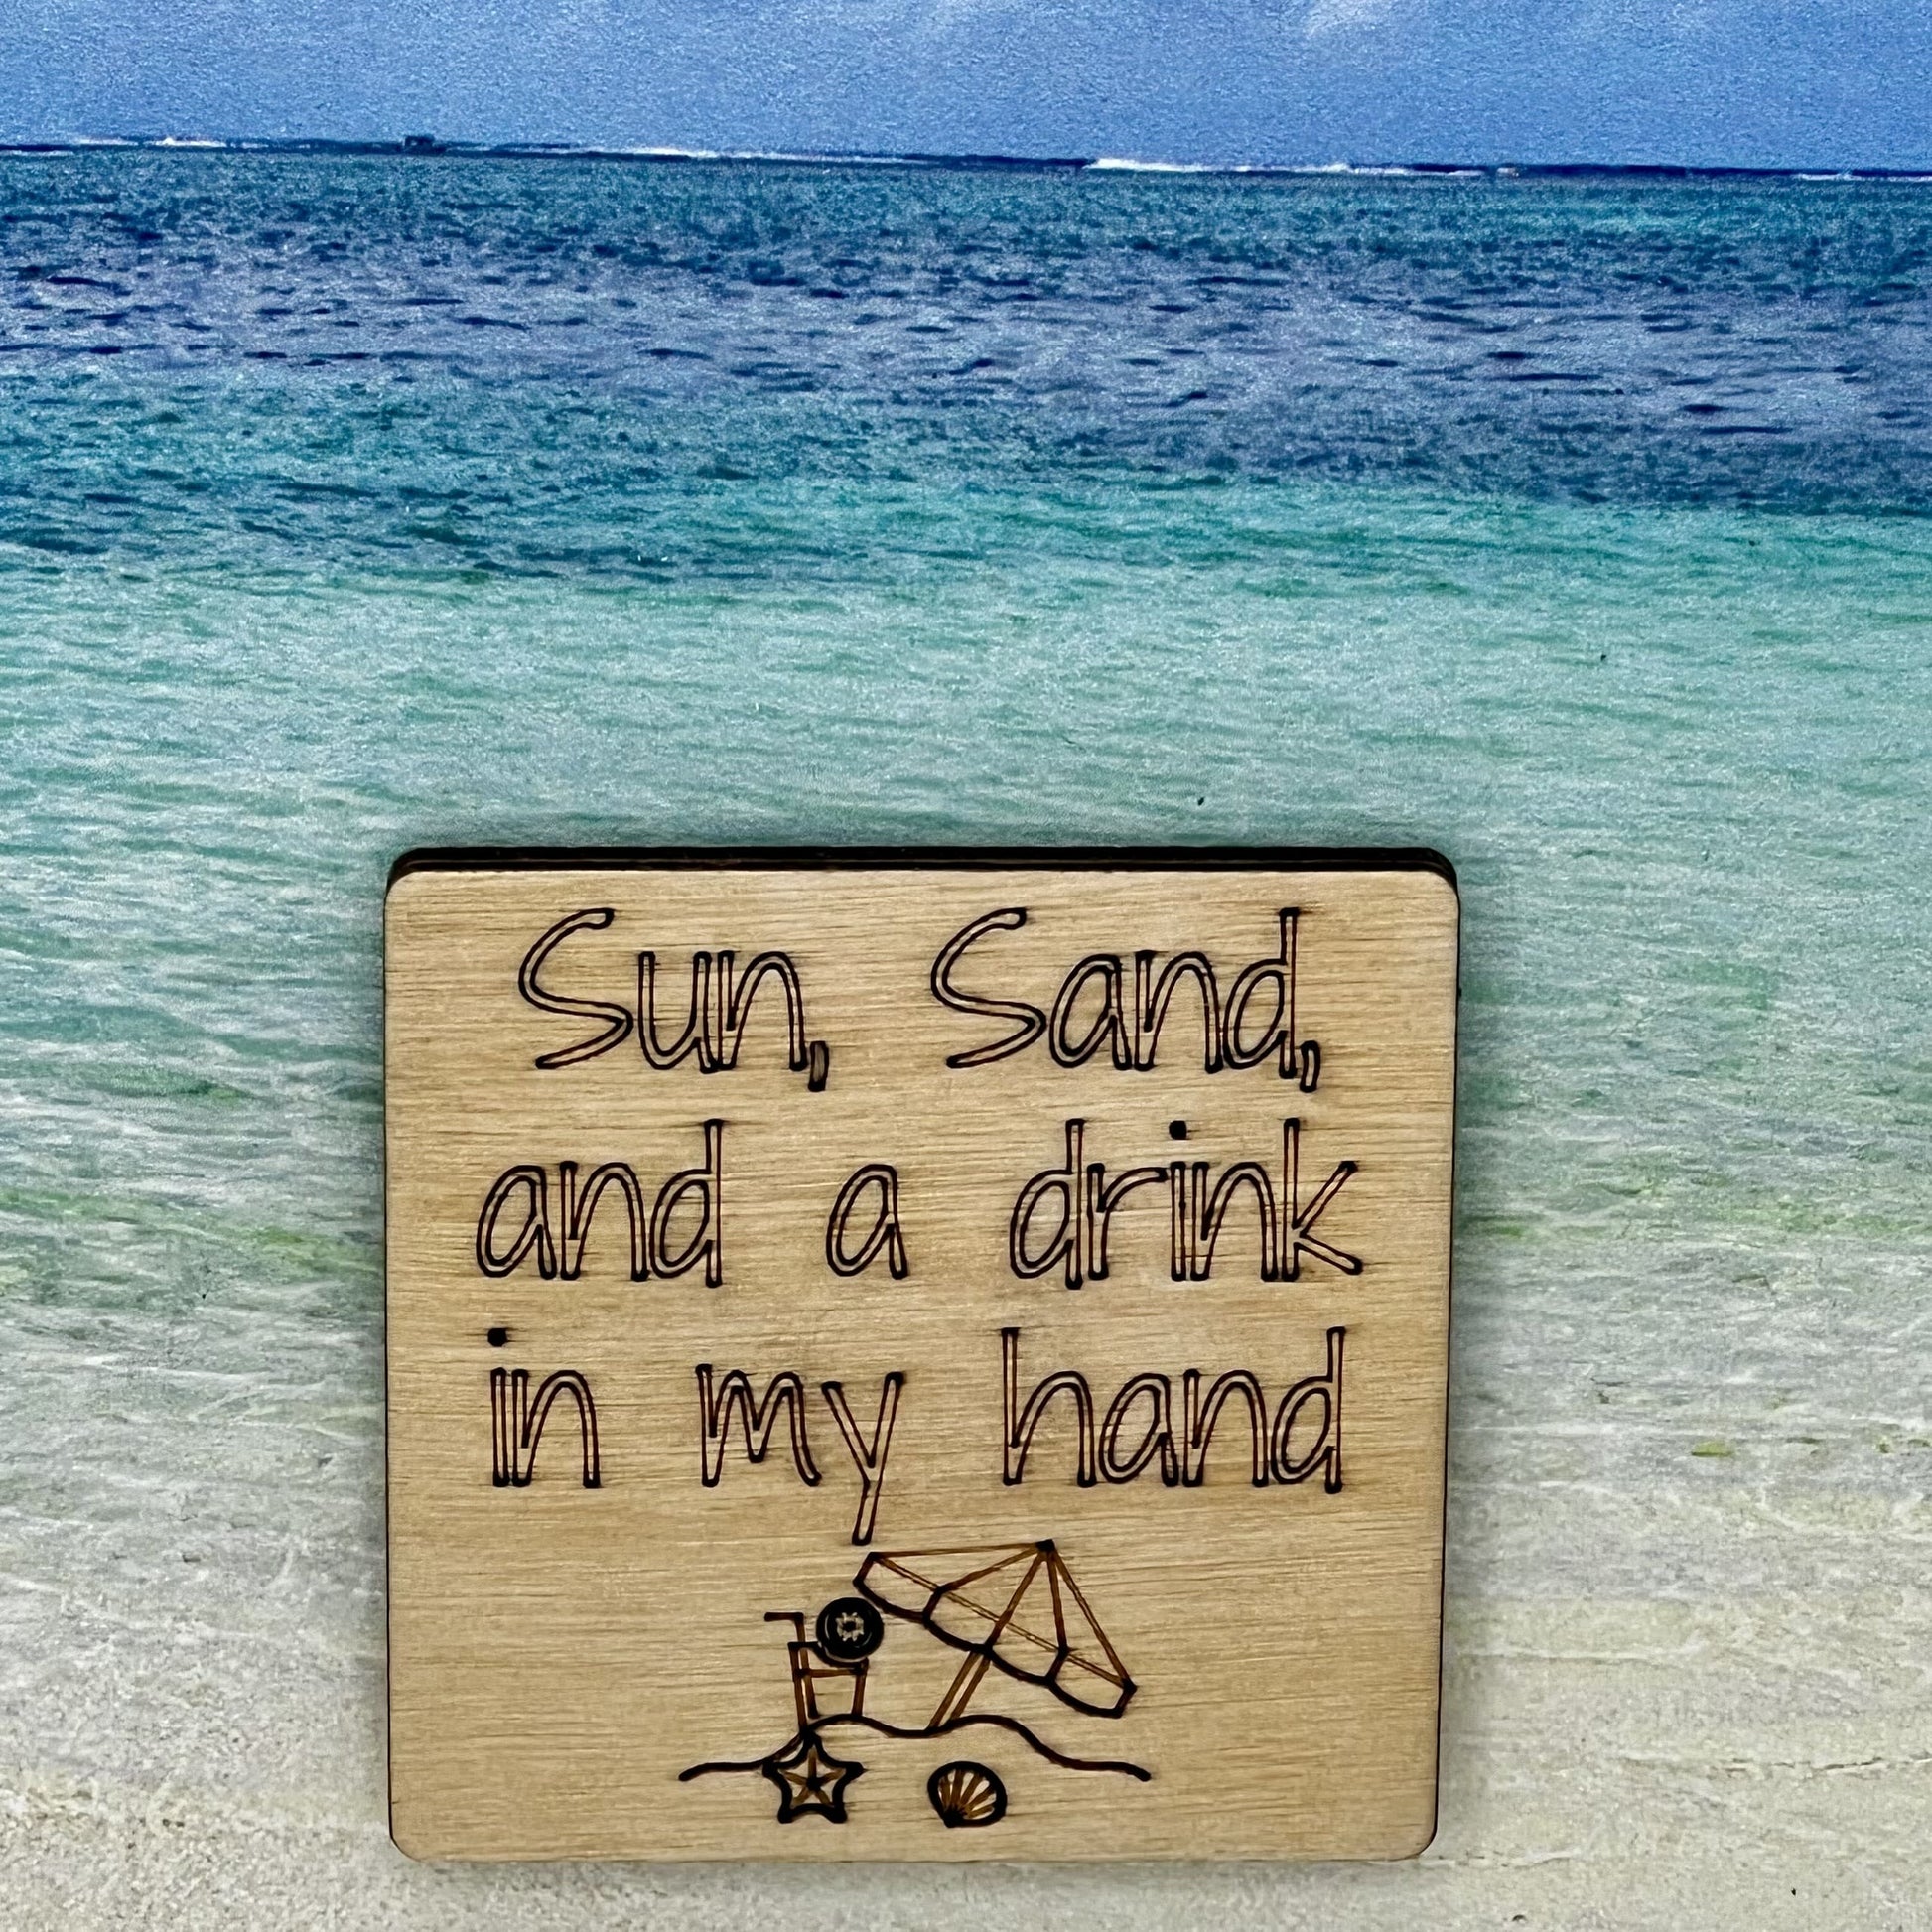 2”x2” wooden square with “Sun, Sand, and a Drink in My Hand" and a beach scene, laser engraved. Background scene is a tropical ocean.